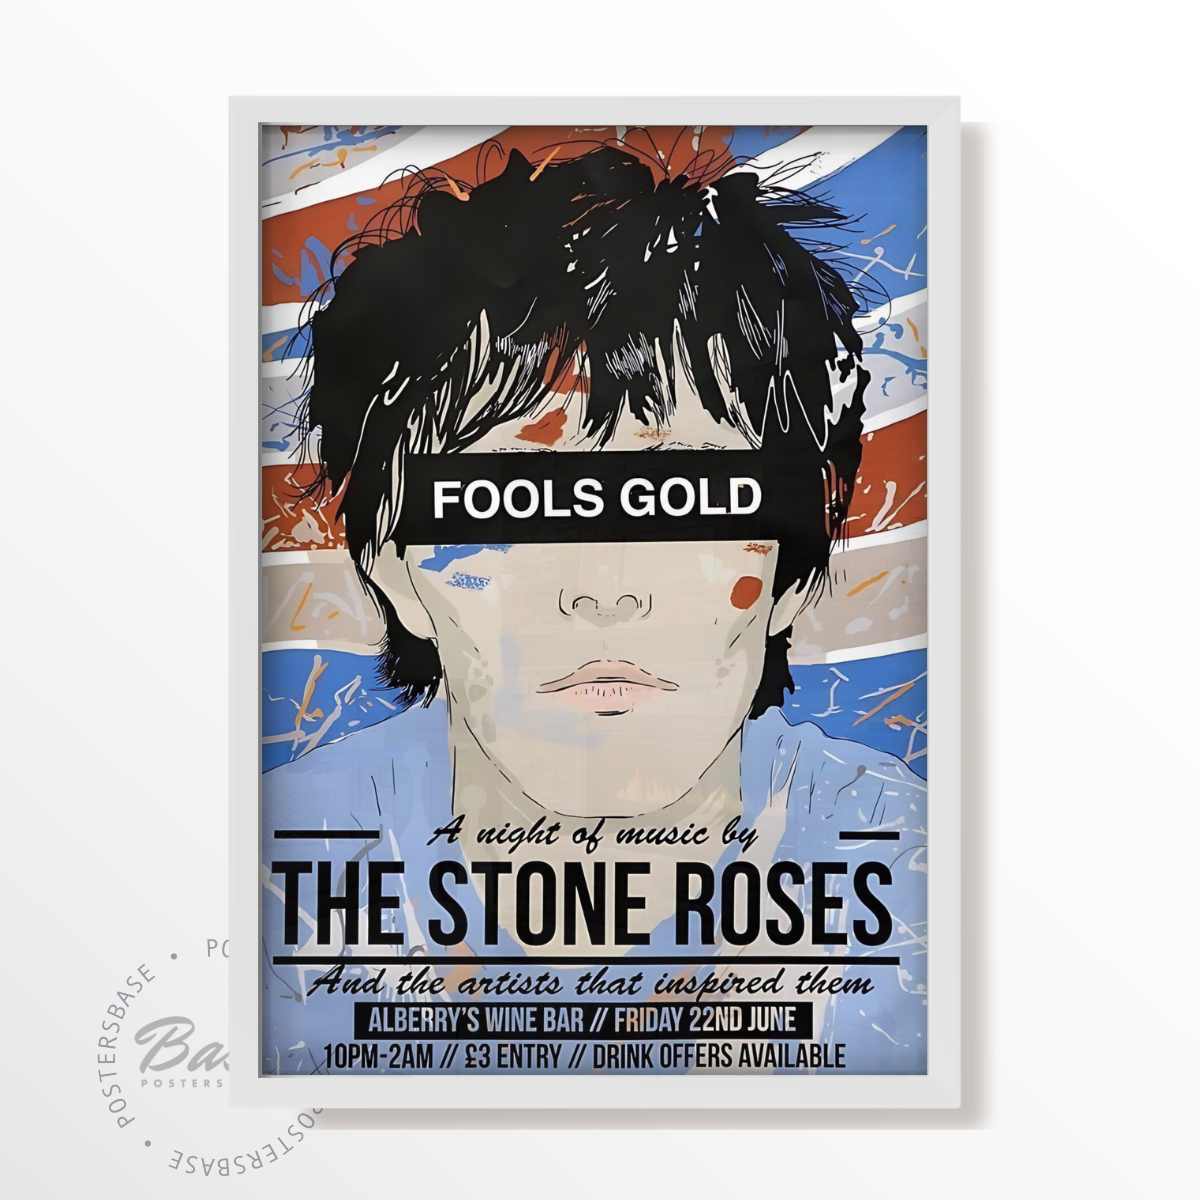 The Stone Roses Fools Gold